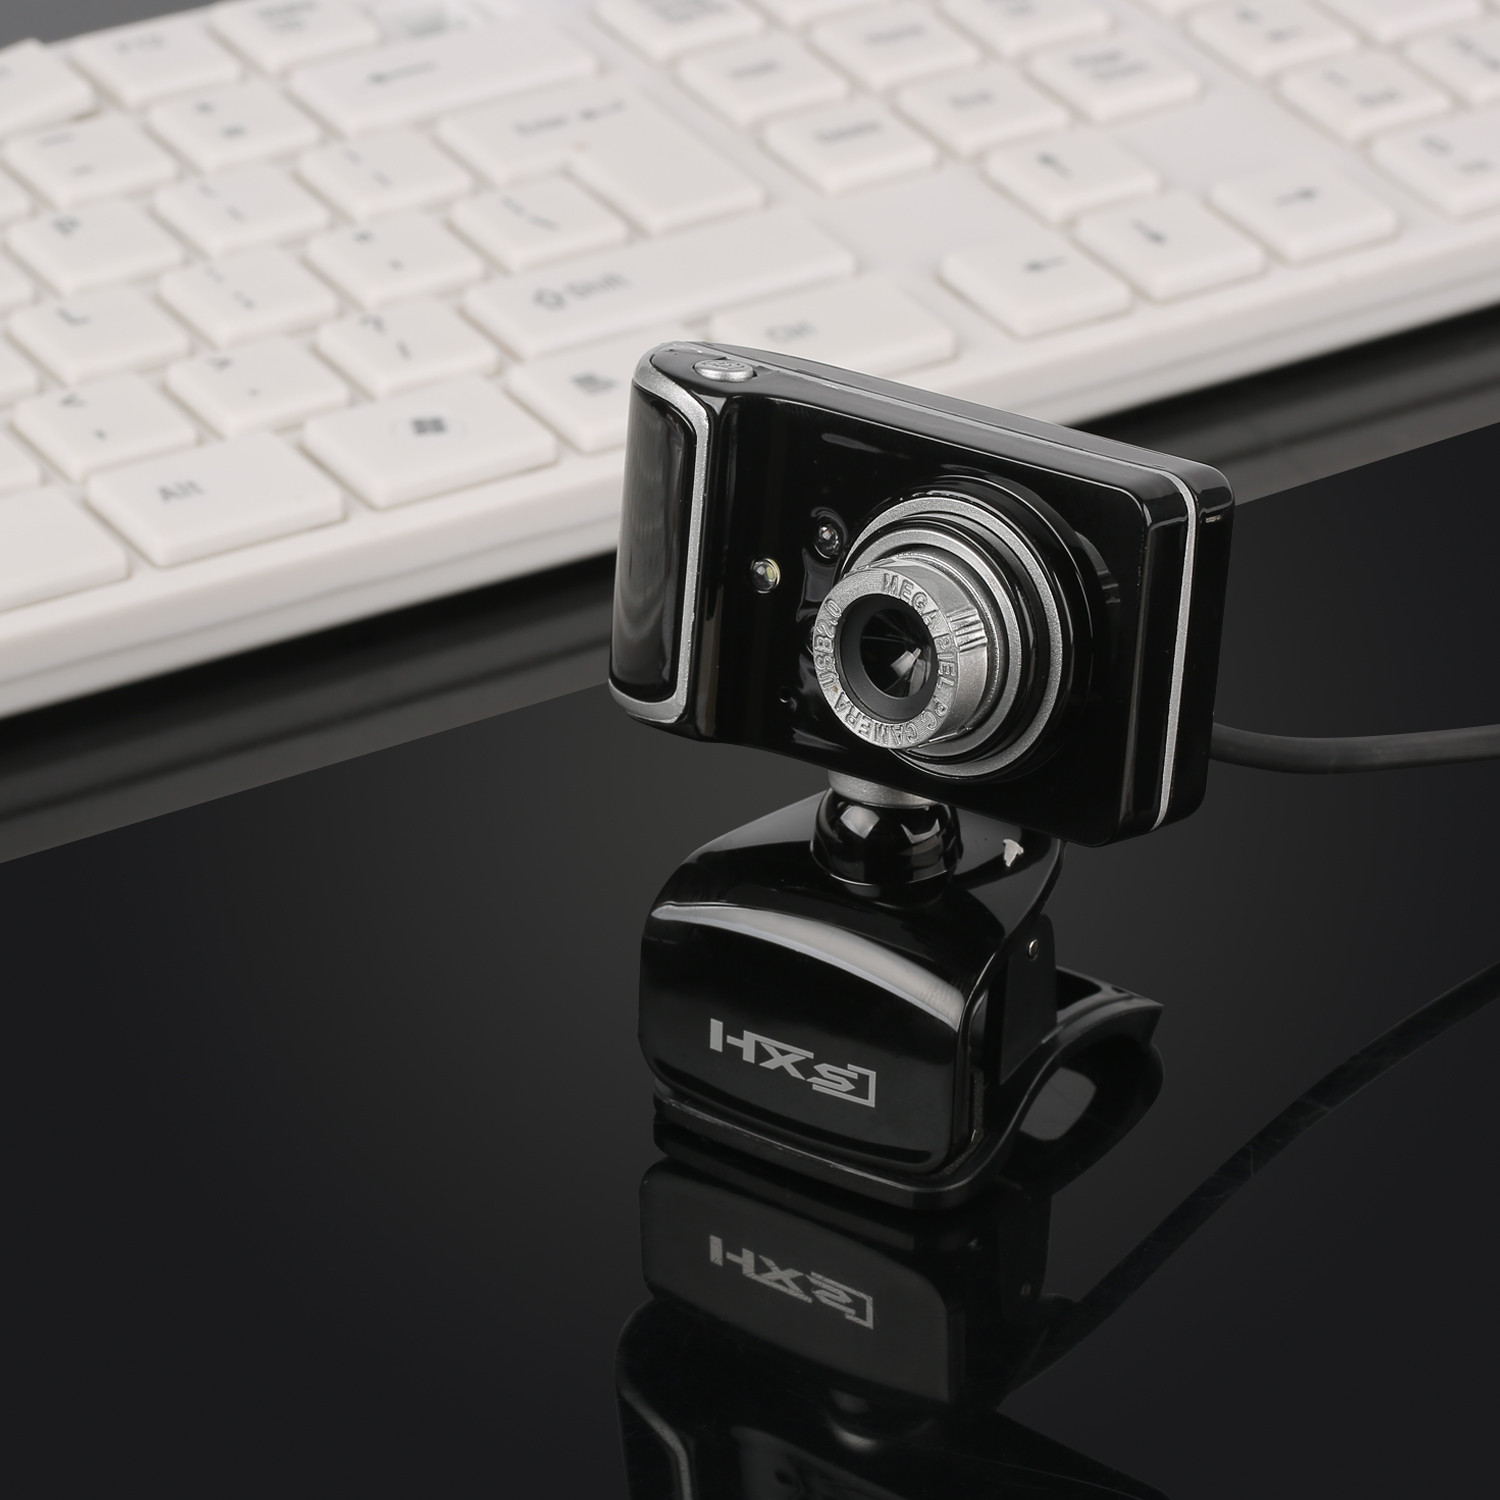 HXSJ-S10-USB-Wired-130W-Pixels-3LED-Night-Vision-Webcam-With-Mic-PC-Laptop-1147849